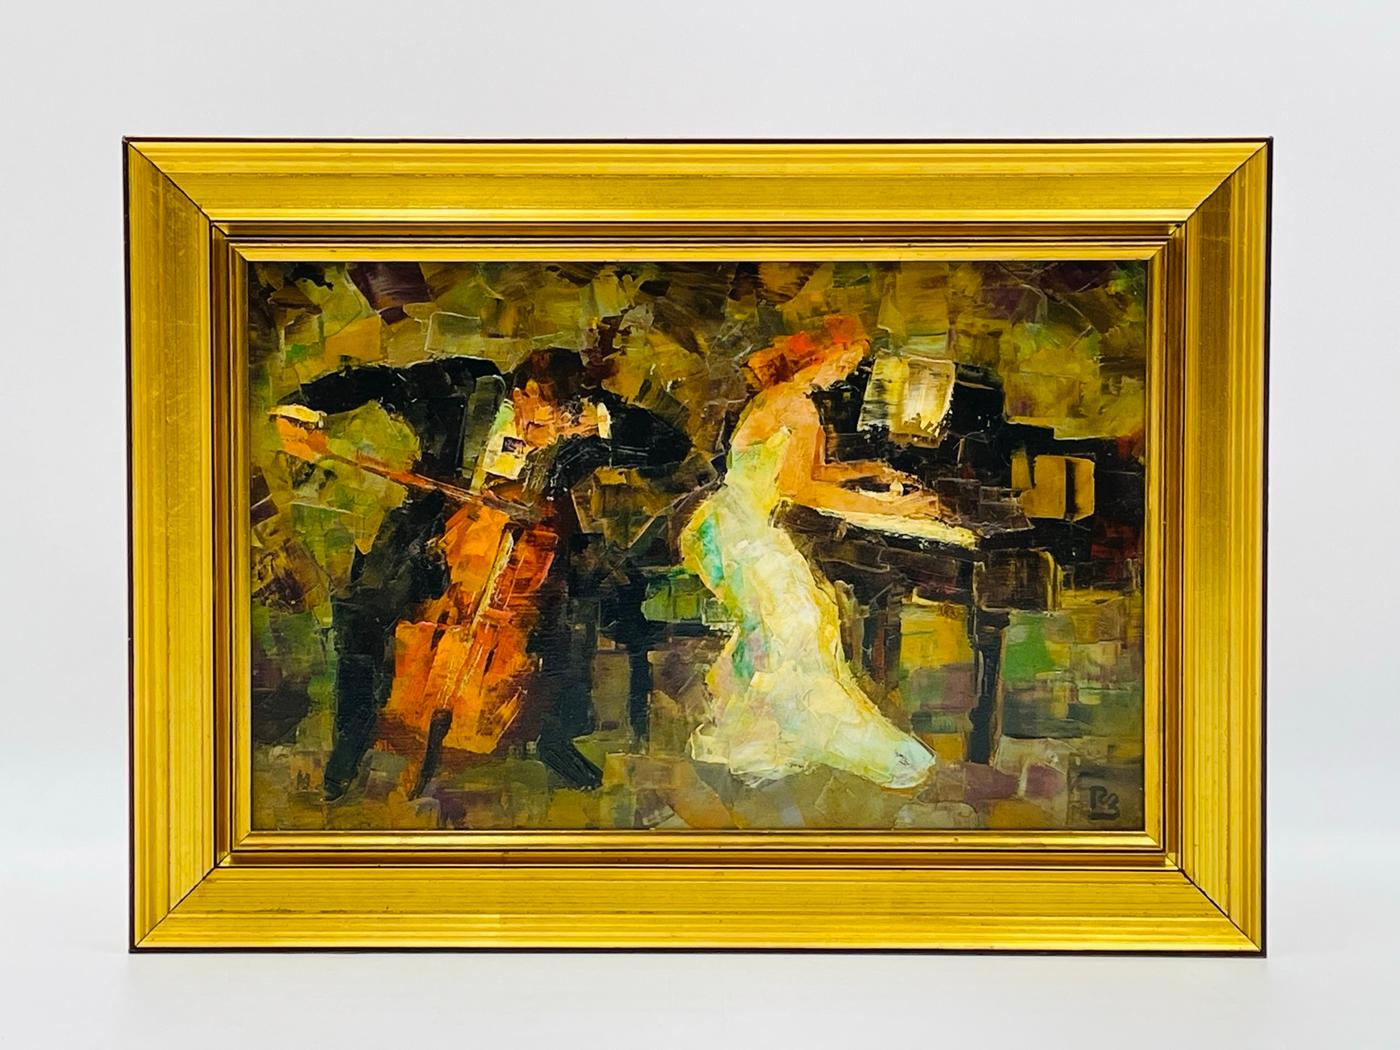 Stunning painting by Los Angeles based artist Zelda Charlotte Sherman. and The piece depicts a lady playing s Piano accompanied by a gentleman playing the cello. 
The painting is done on a wooden board and has an array of colors.
The piece has